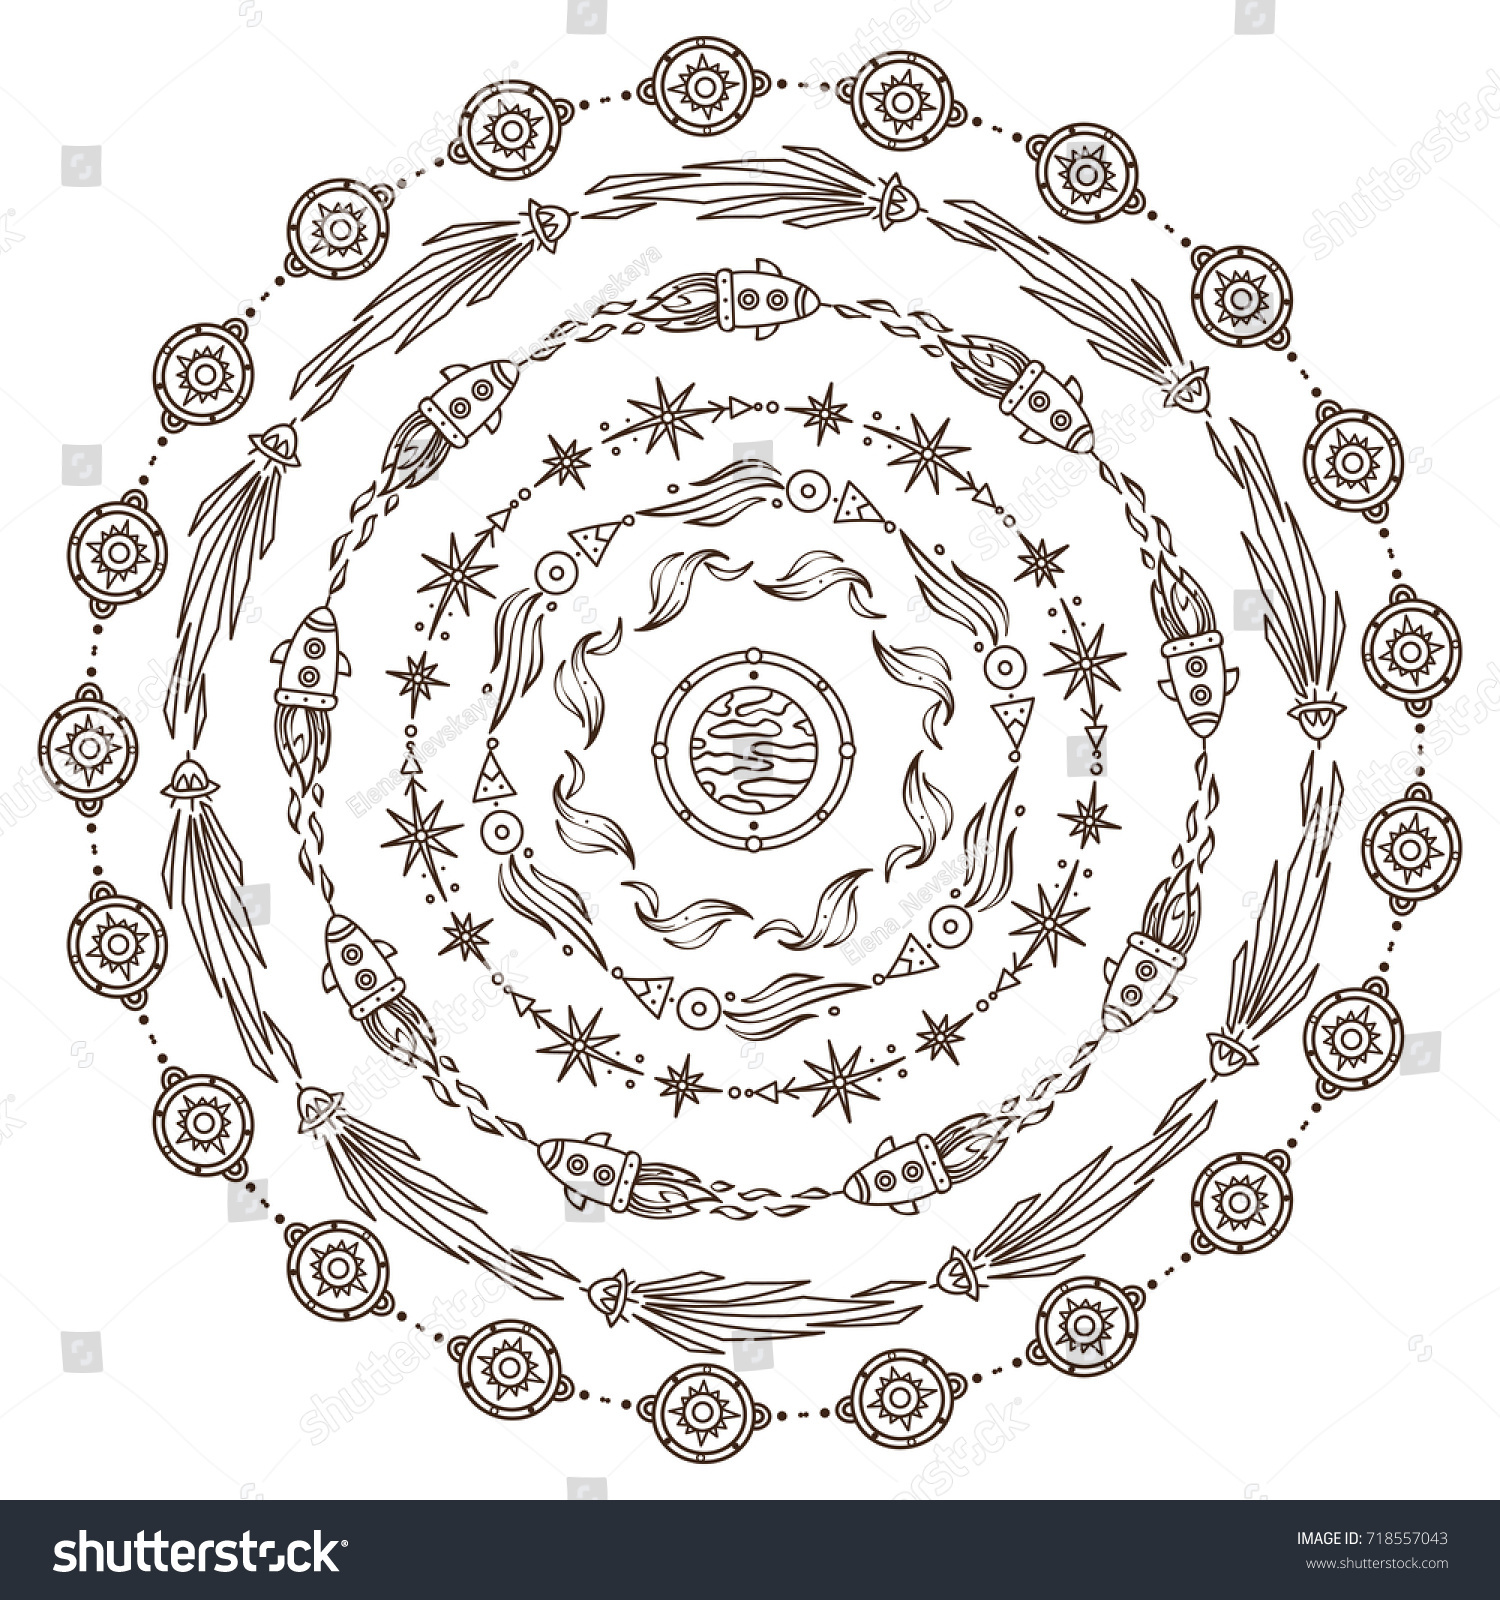 Hand Drawn Vector Coloring Page Abstract Stock Vector Royalty Free